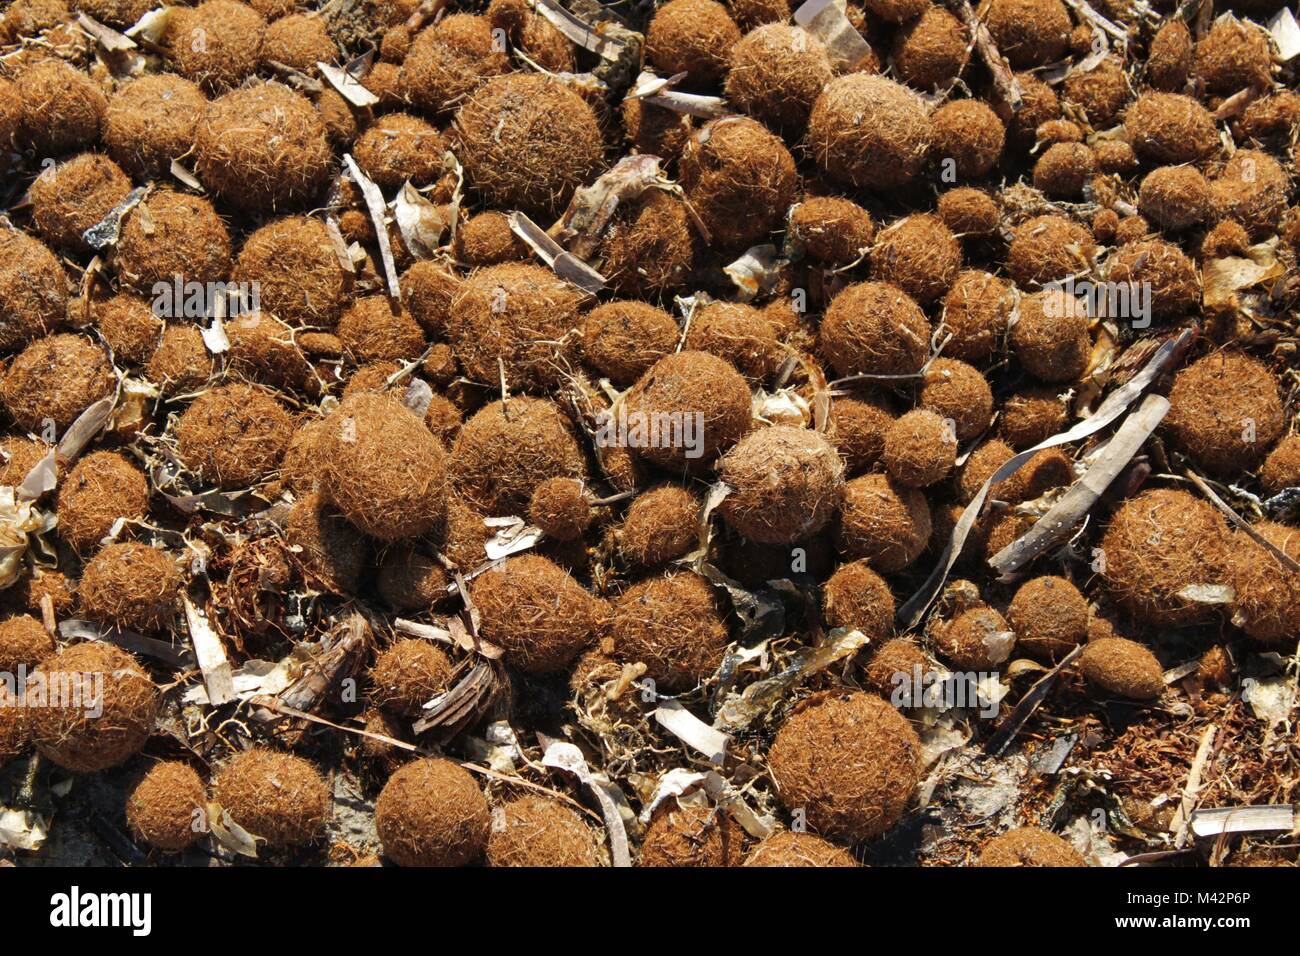 Dry oceanic posidonia seaweed balls on the beach and sand texture in a sunny day in winter Stock Photo